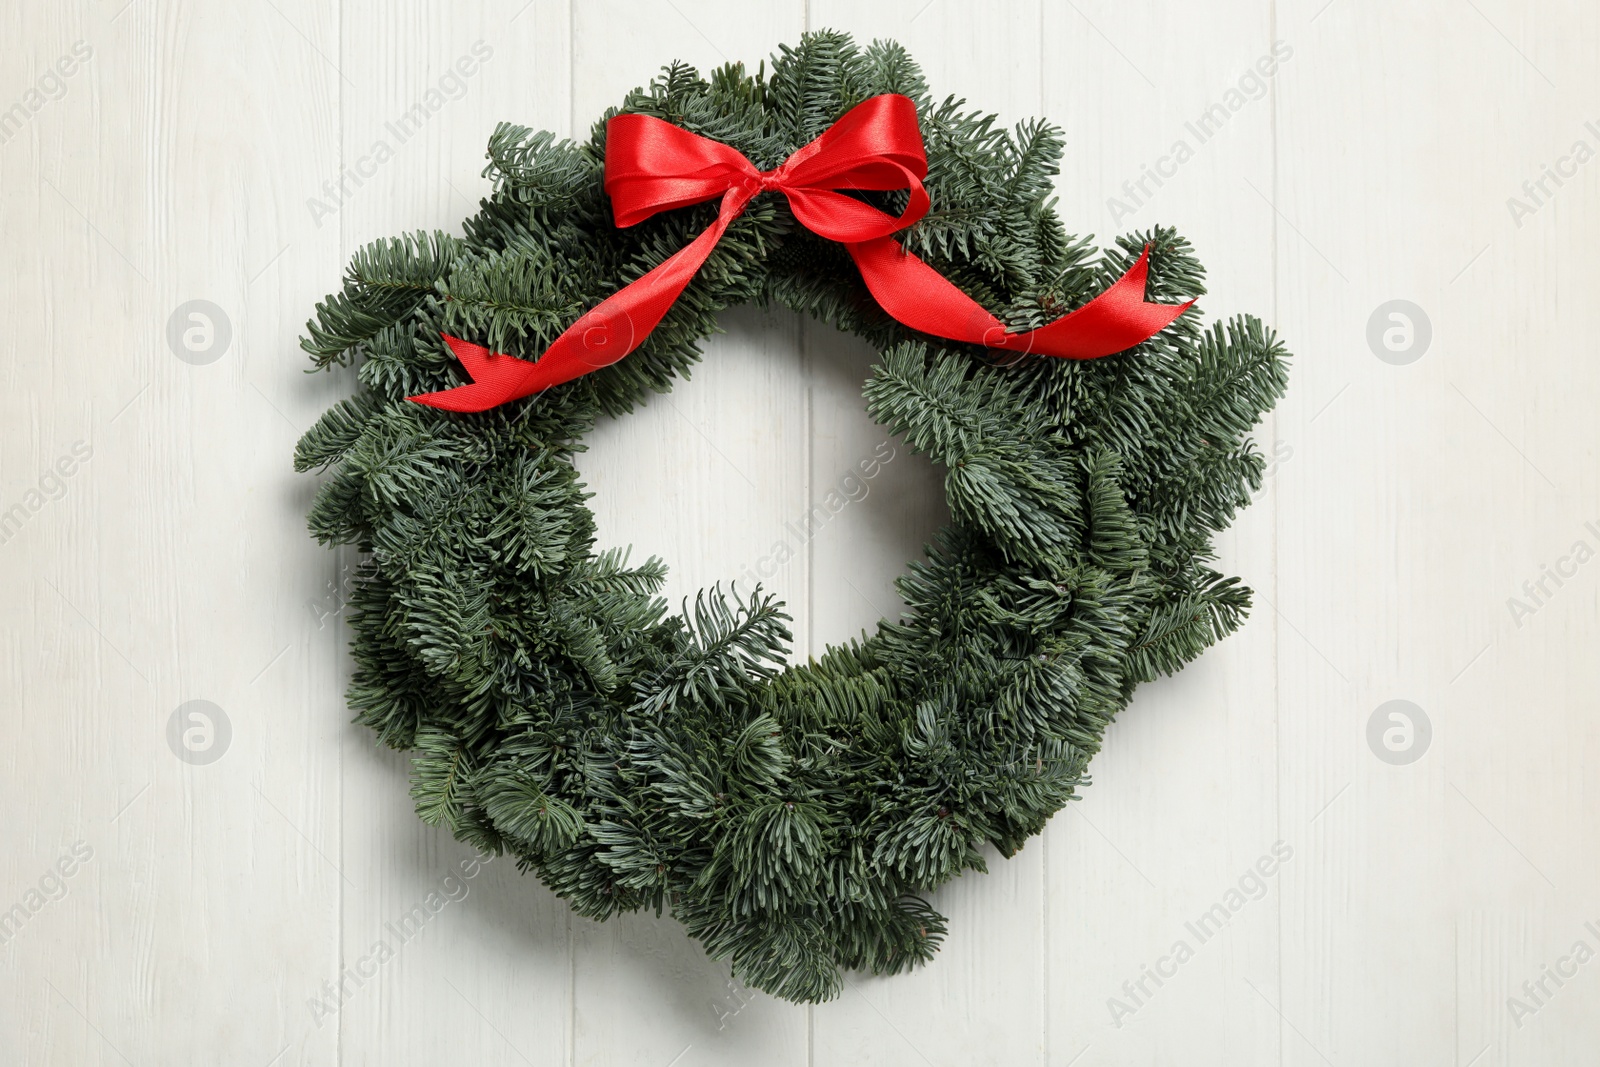 Photo of Christmas wreath made of fir tree branches with red ribbon on white wooden background